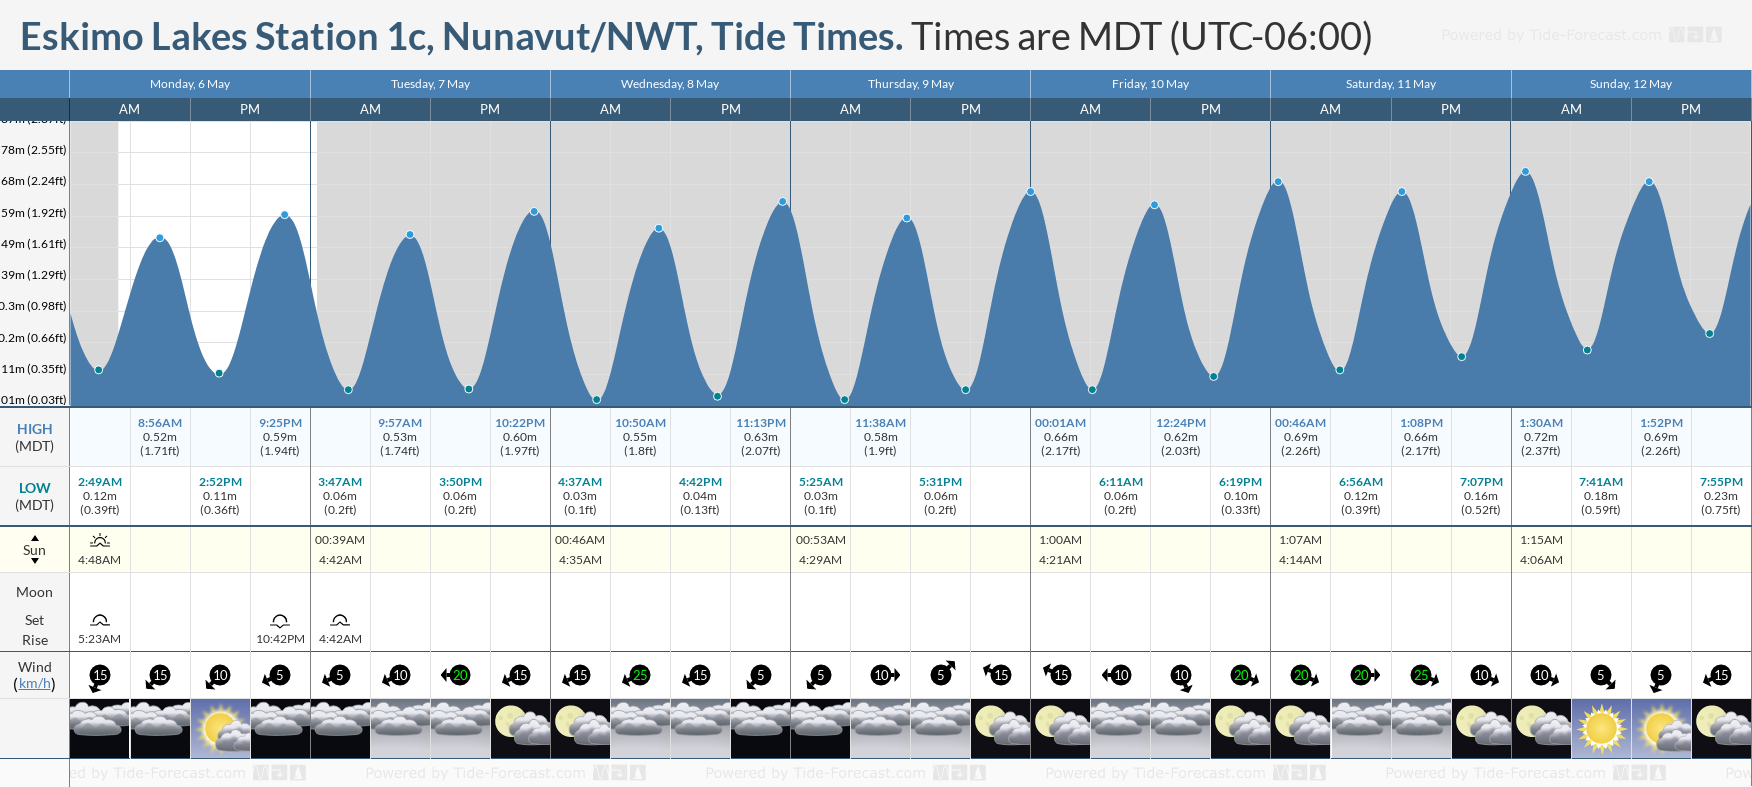 Eskimo Lakes Station 1c, Nunavut/NWT Tide Chart including high and low tide times for the next 7 days